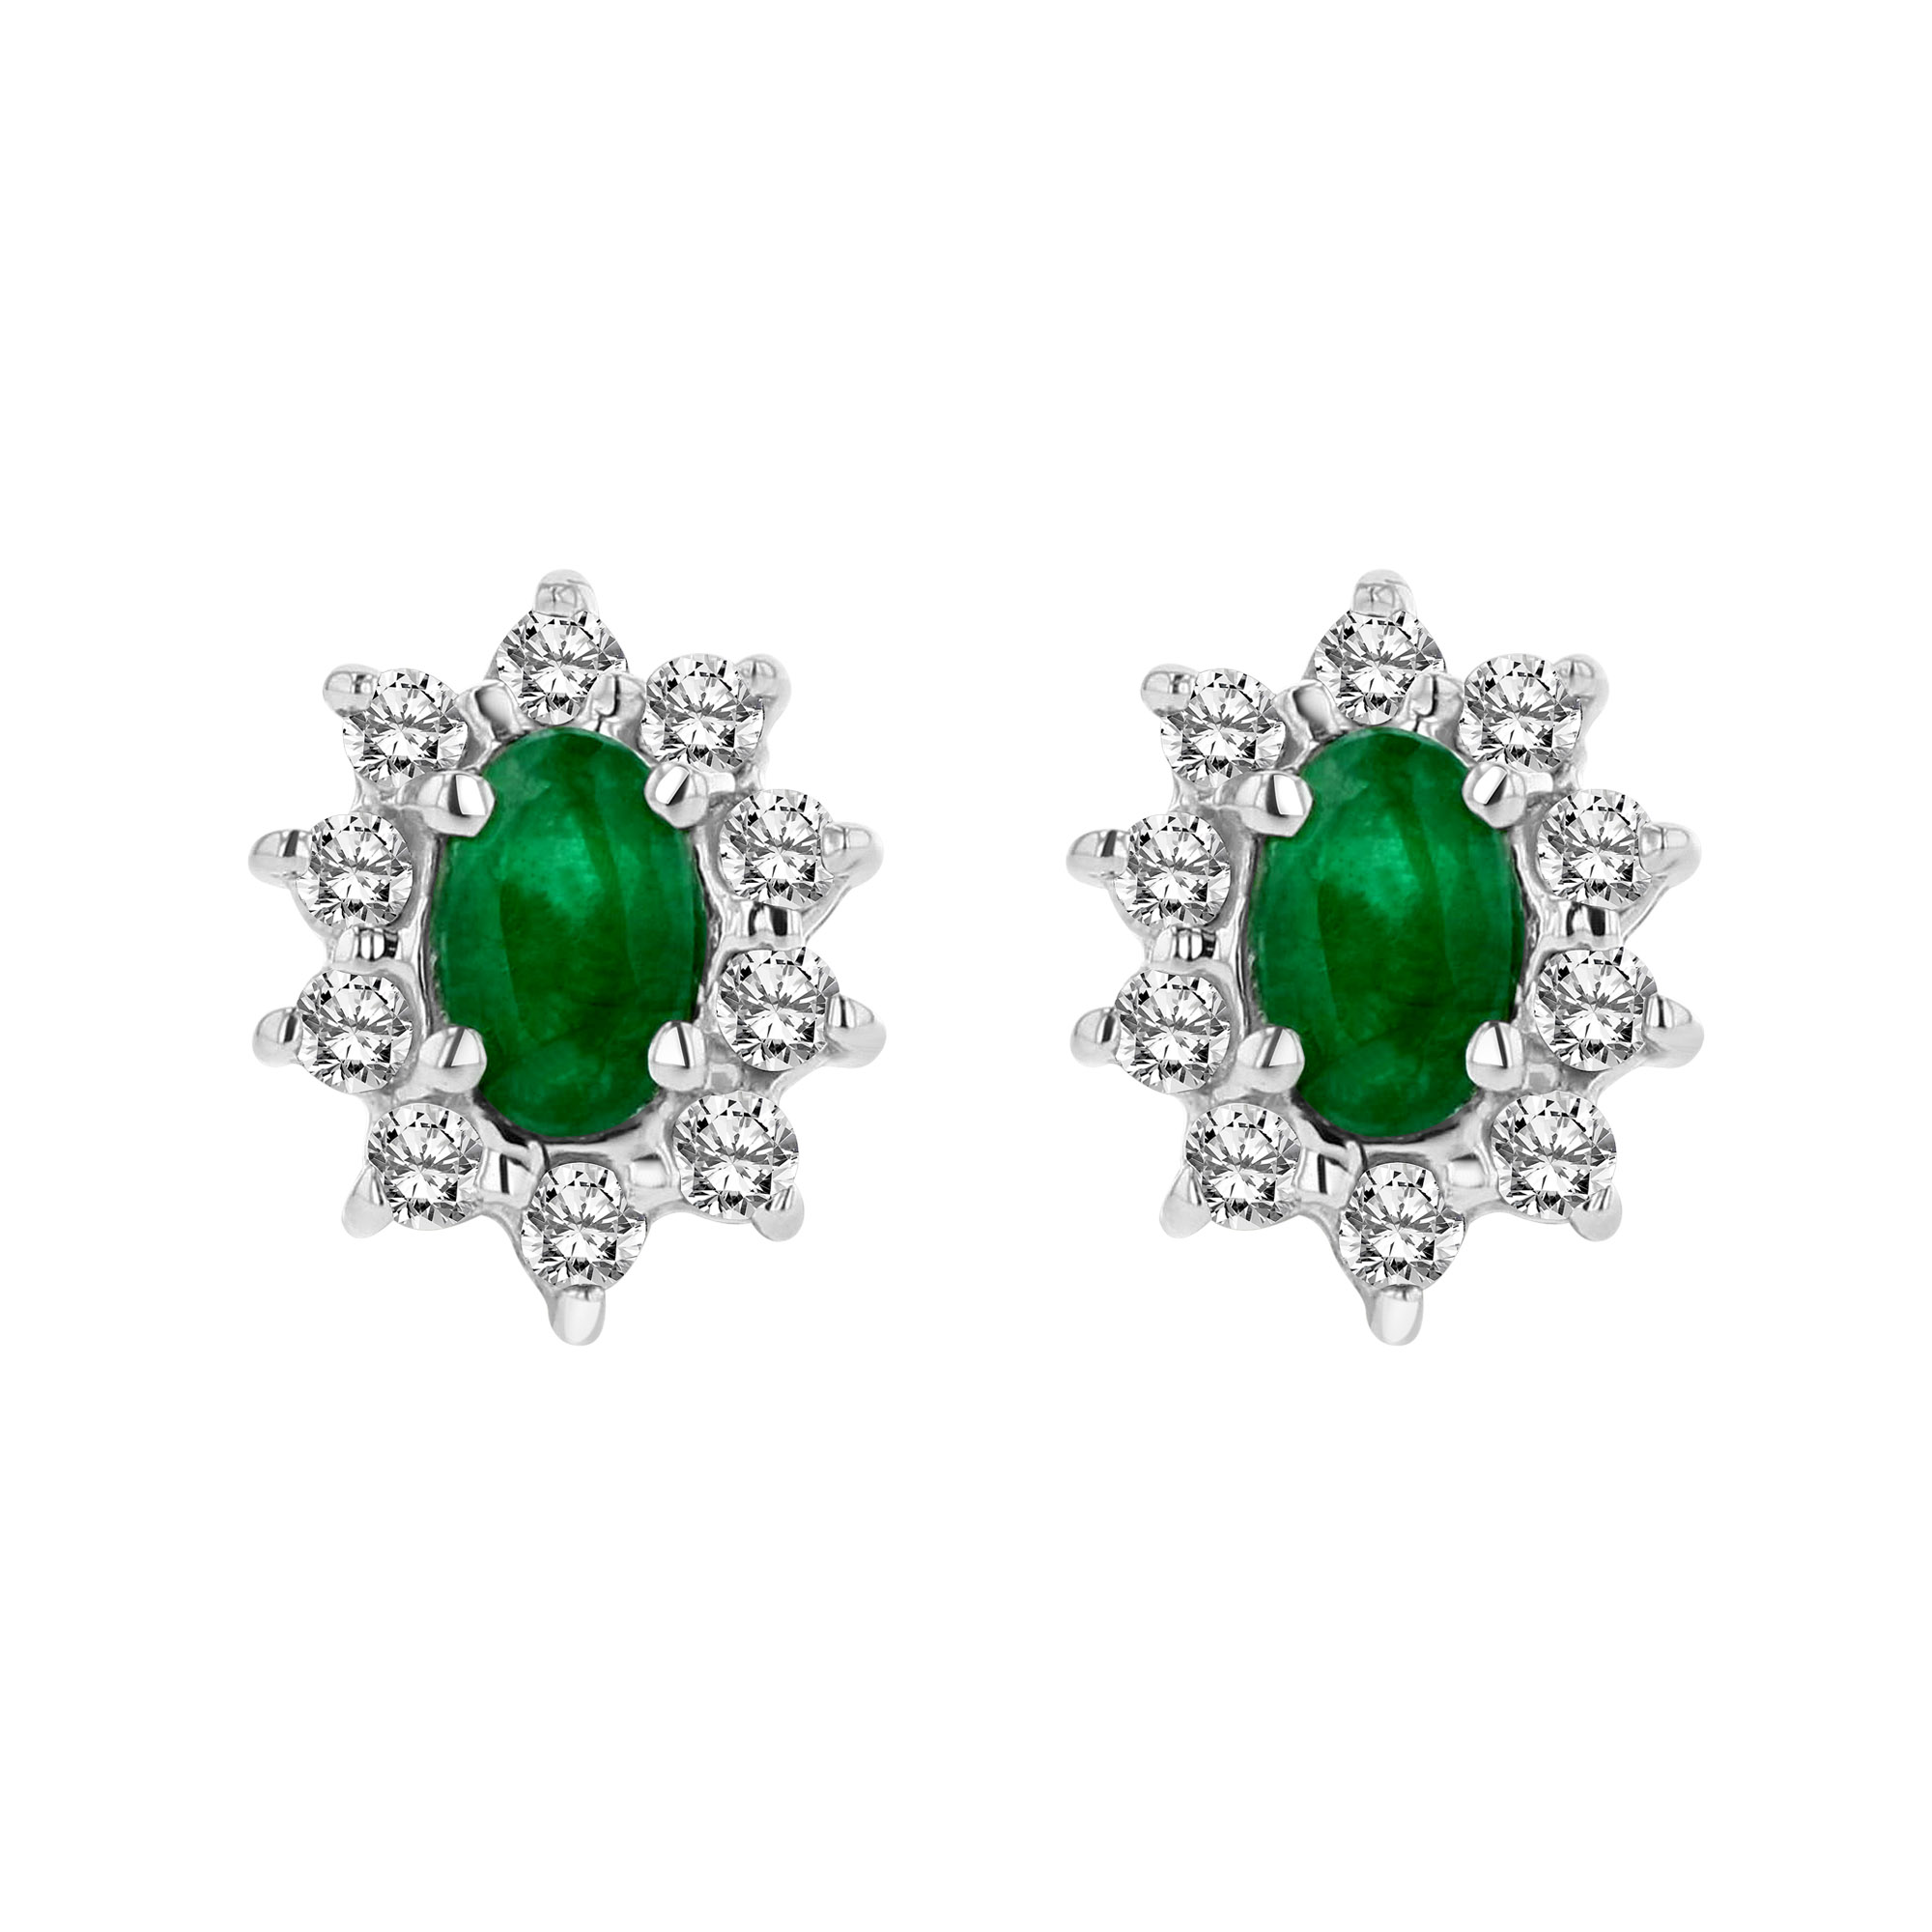 0.70cttw Diamond and Emerald Earring in 14k Gold